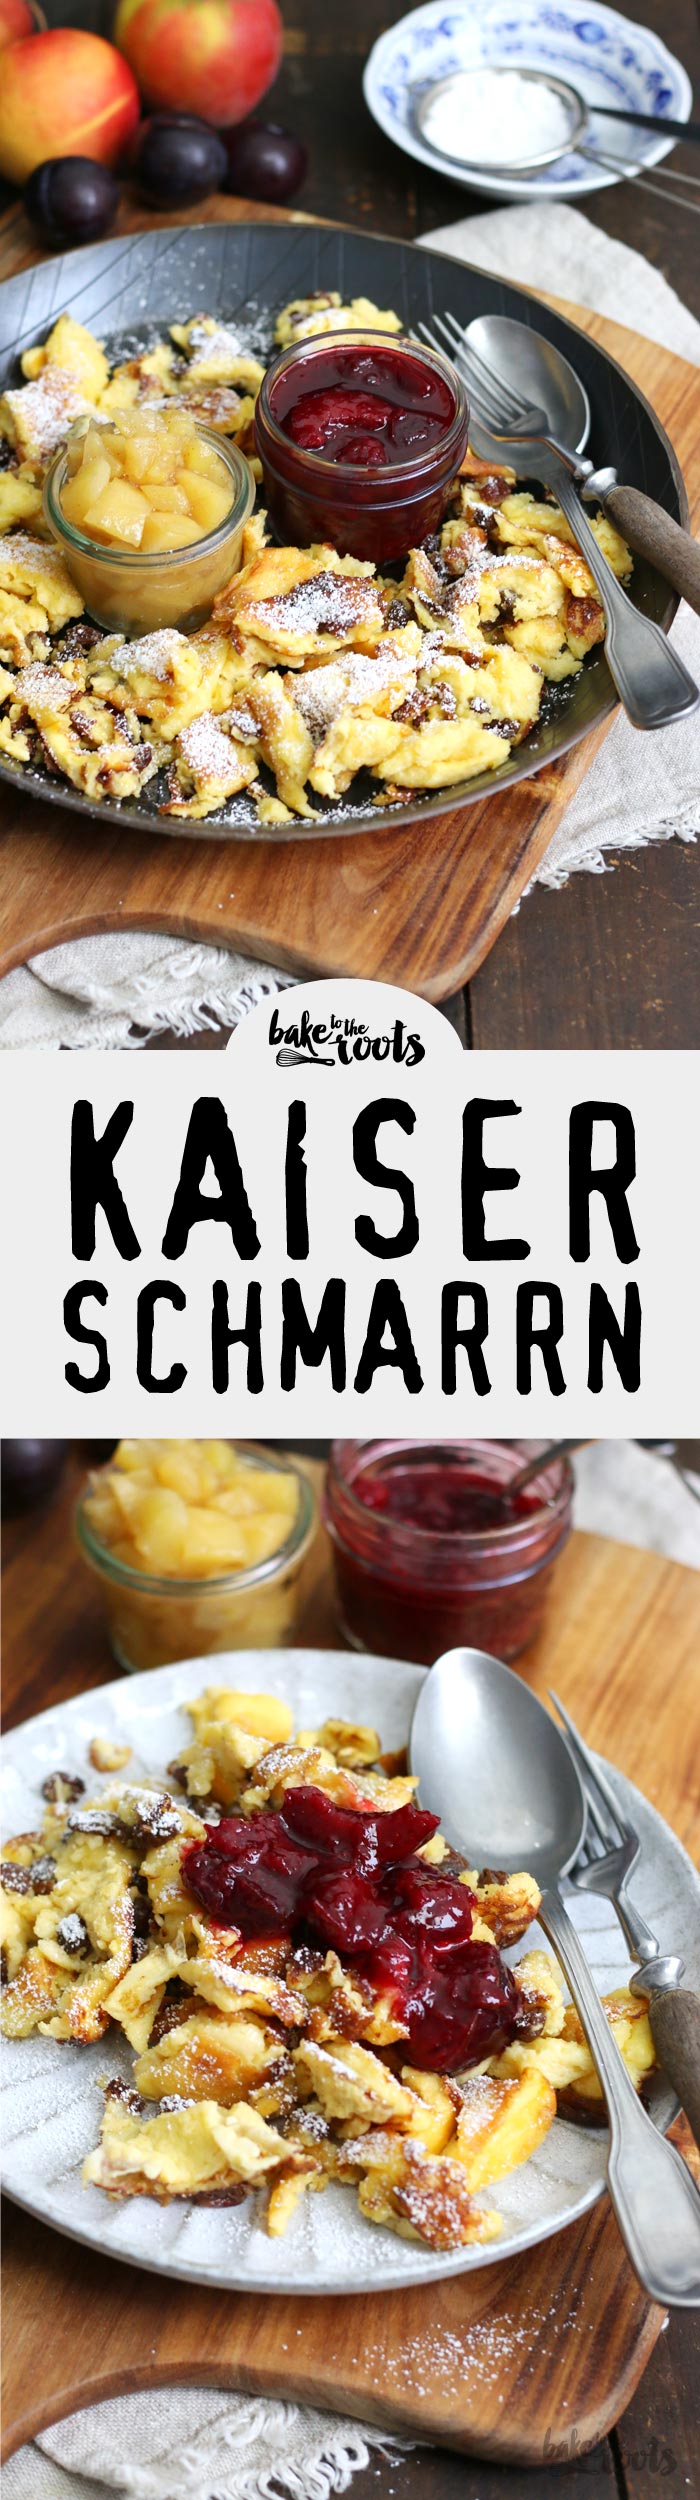 Delicious Kaiserschmarrn aka. Shredded Pancake with Plum Compote | Bake to the roots